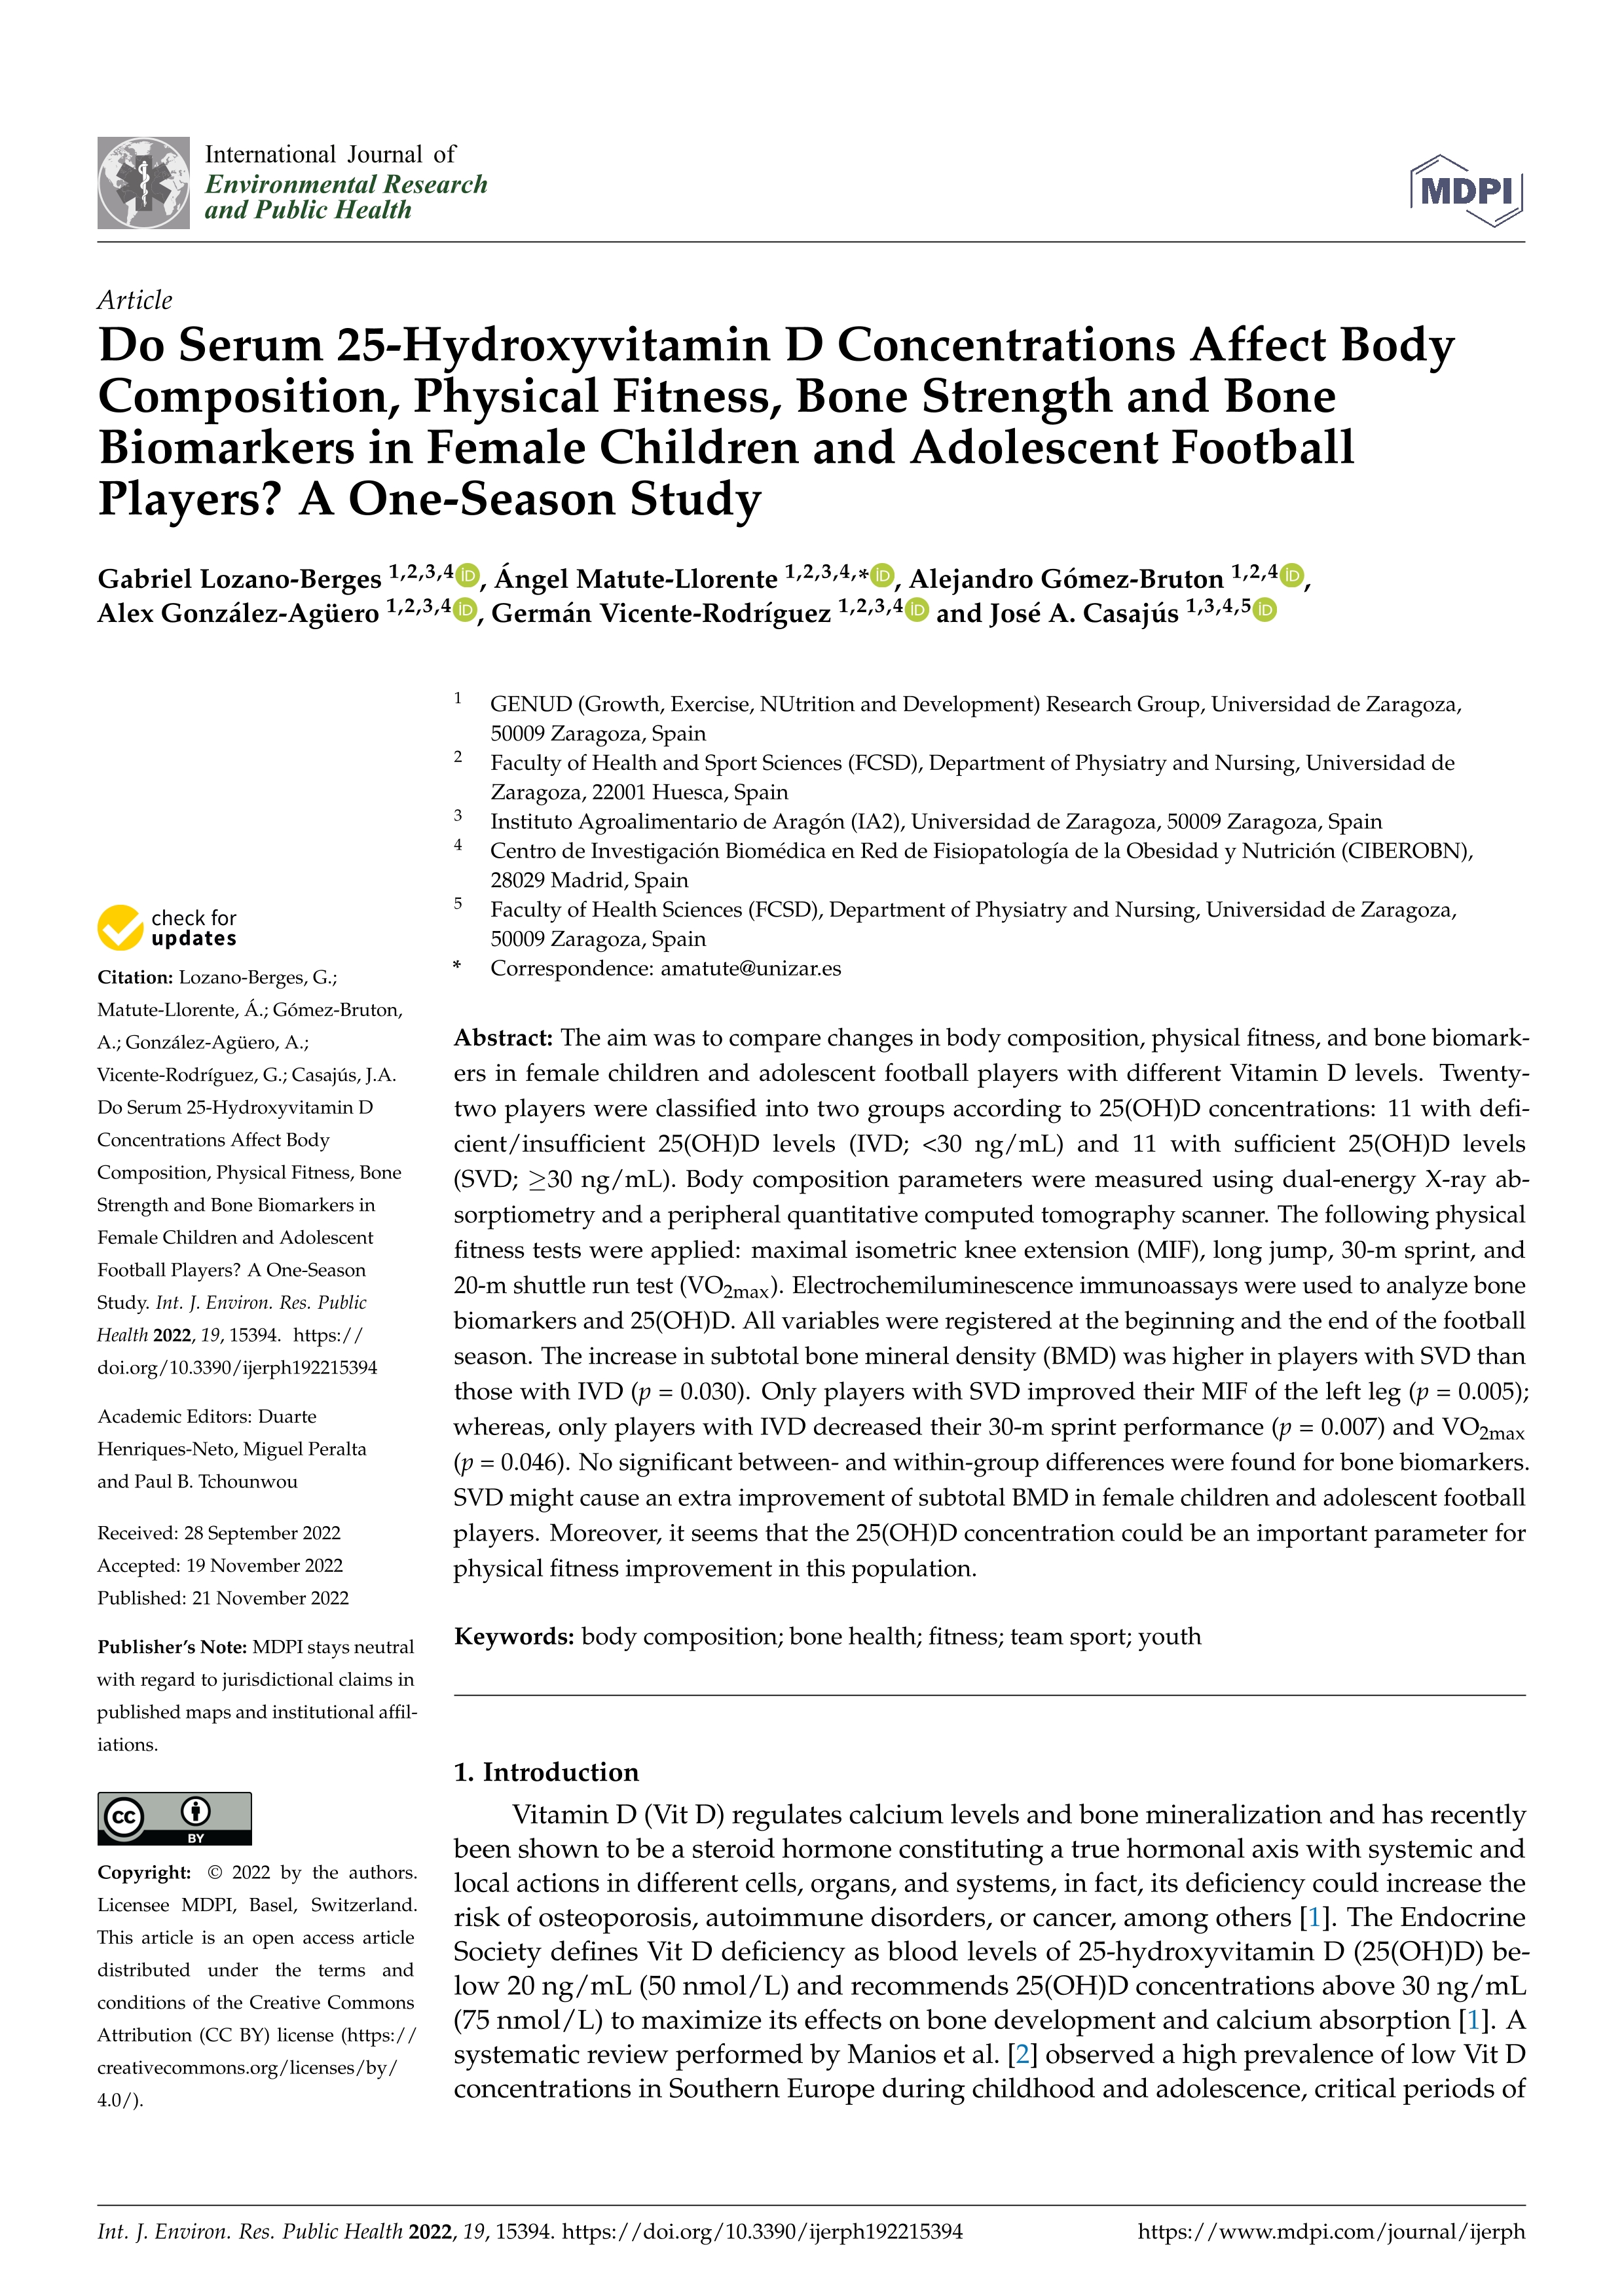 Do Serum 25-Hydroxyvitamin D Concentrations Affect Body Composition, Physical Fitness, Bone Strength and Bone Biomarkers in Female Children and Adolescent Football Players? A One-Season Study